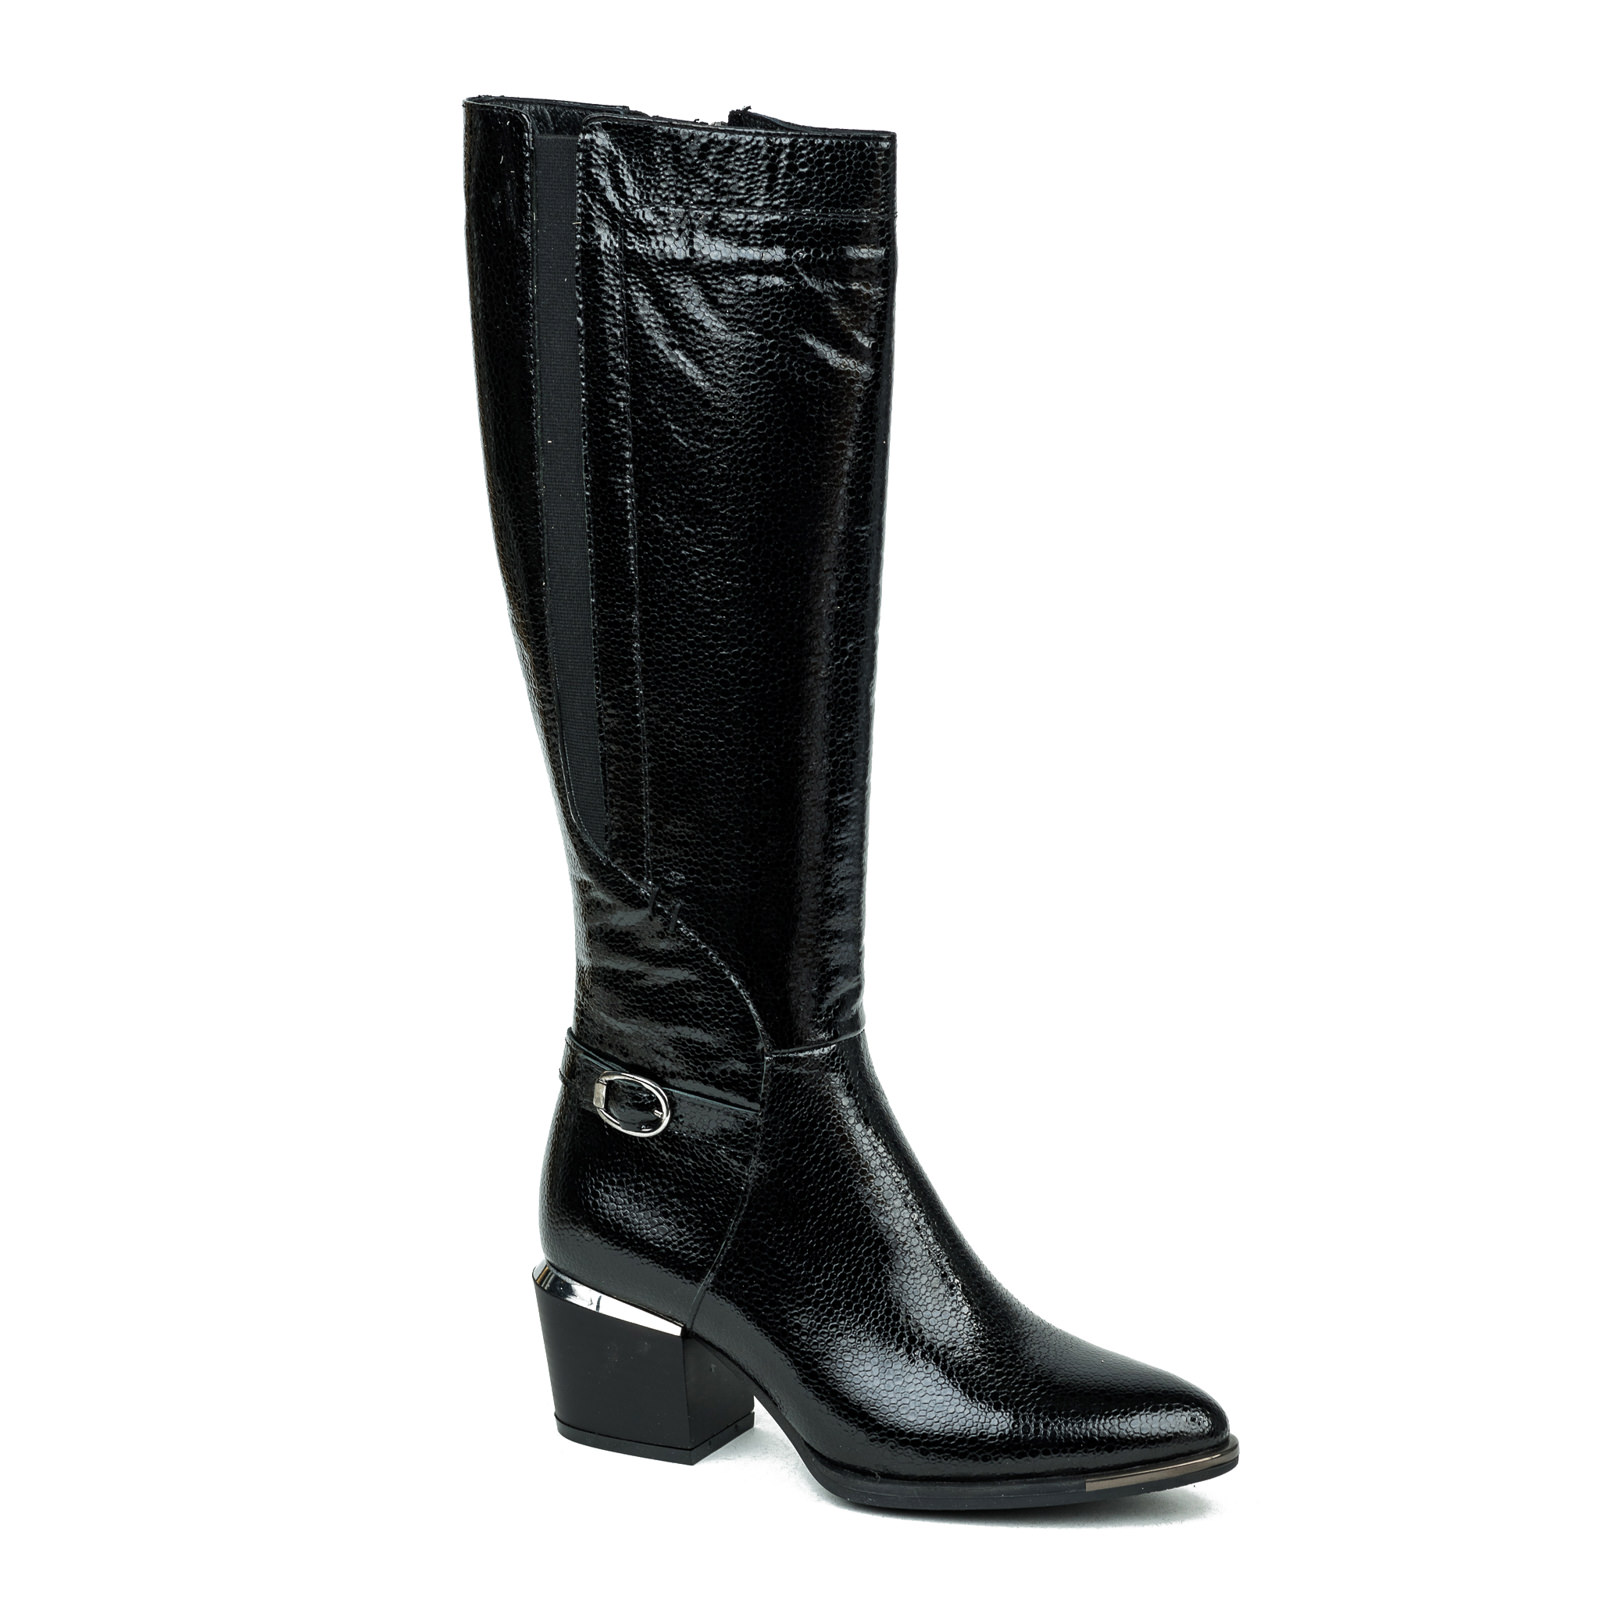 Leather boots B094 - BLACK